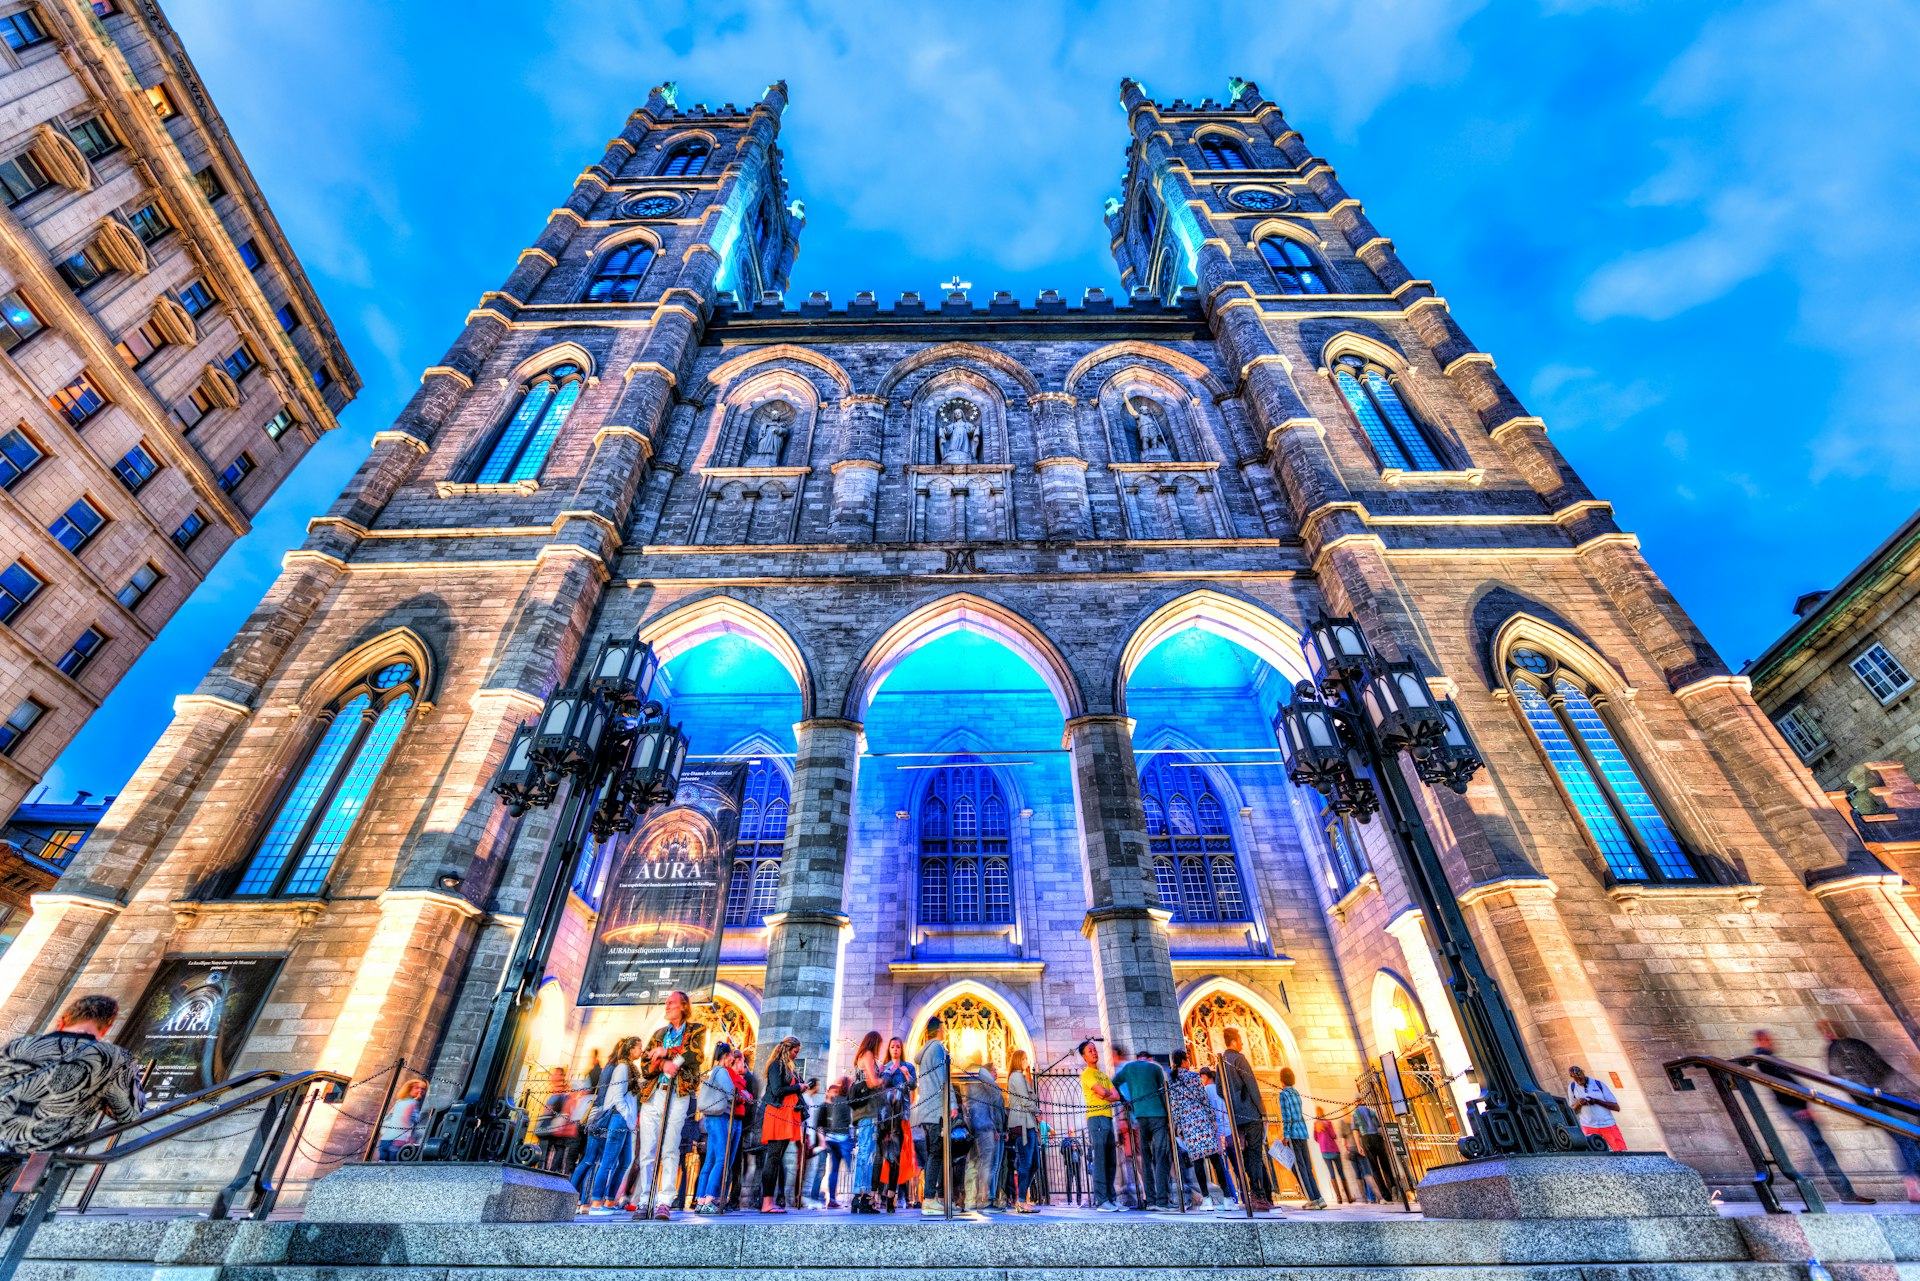 People gather outside a Gothic cathedral in the evening, which is lit up with pale blue lights